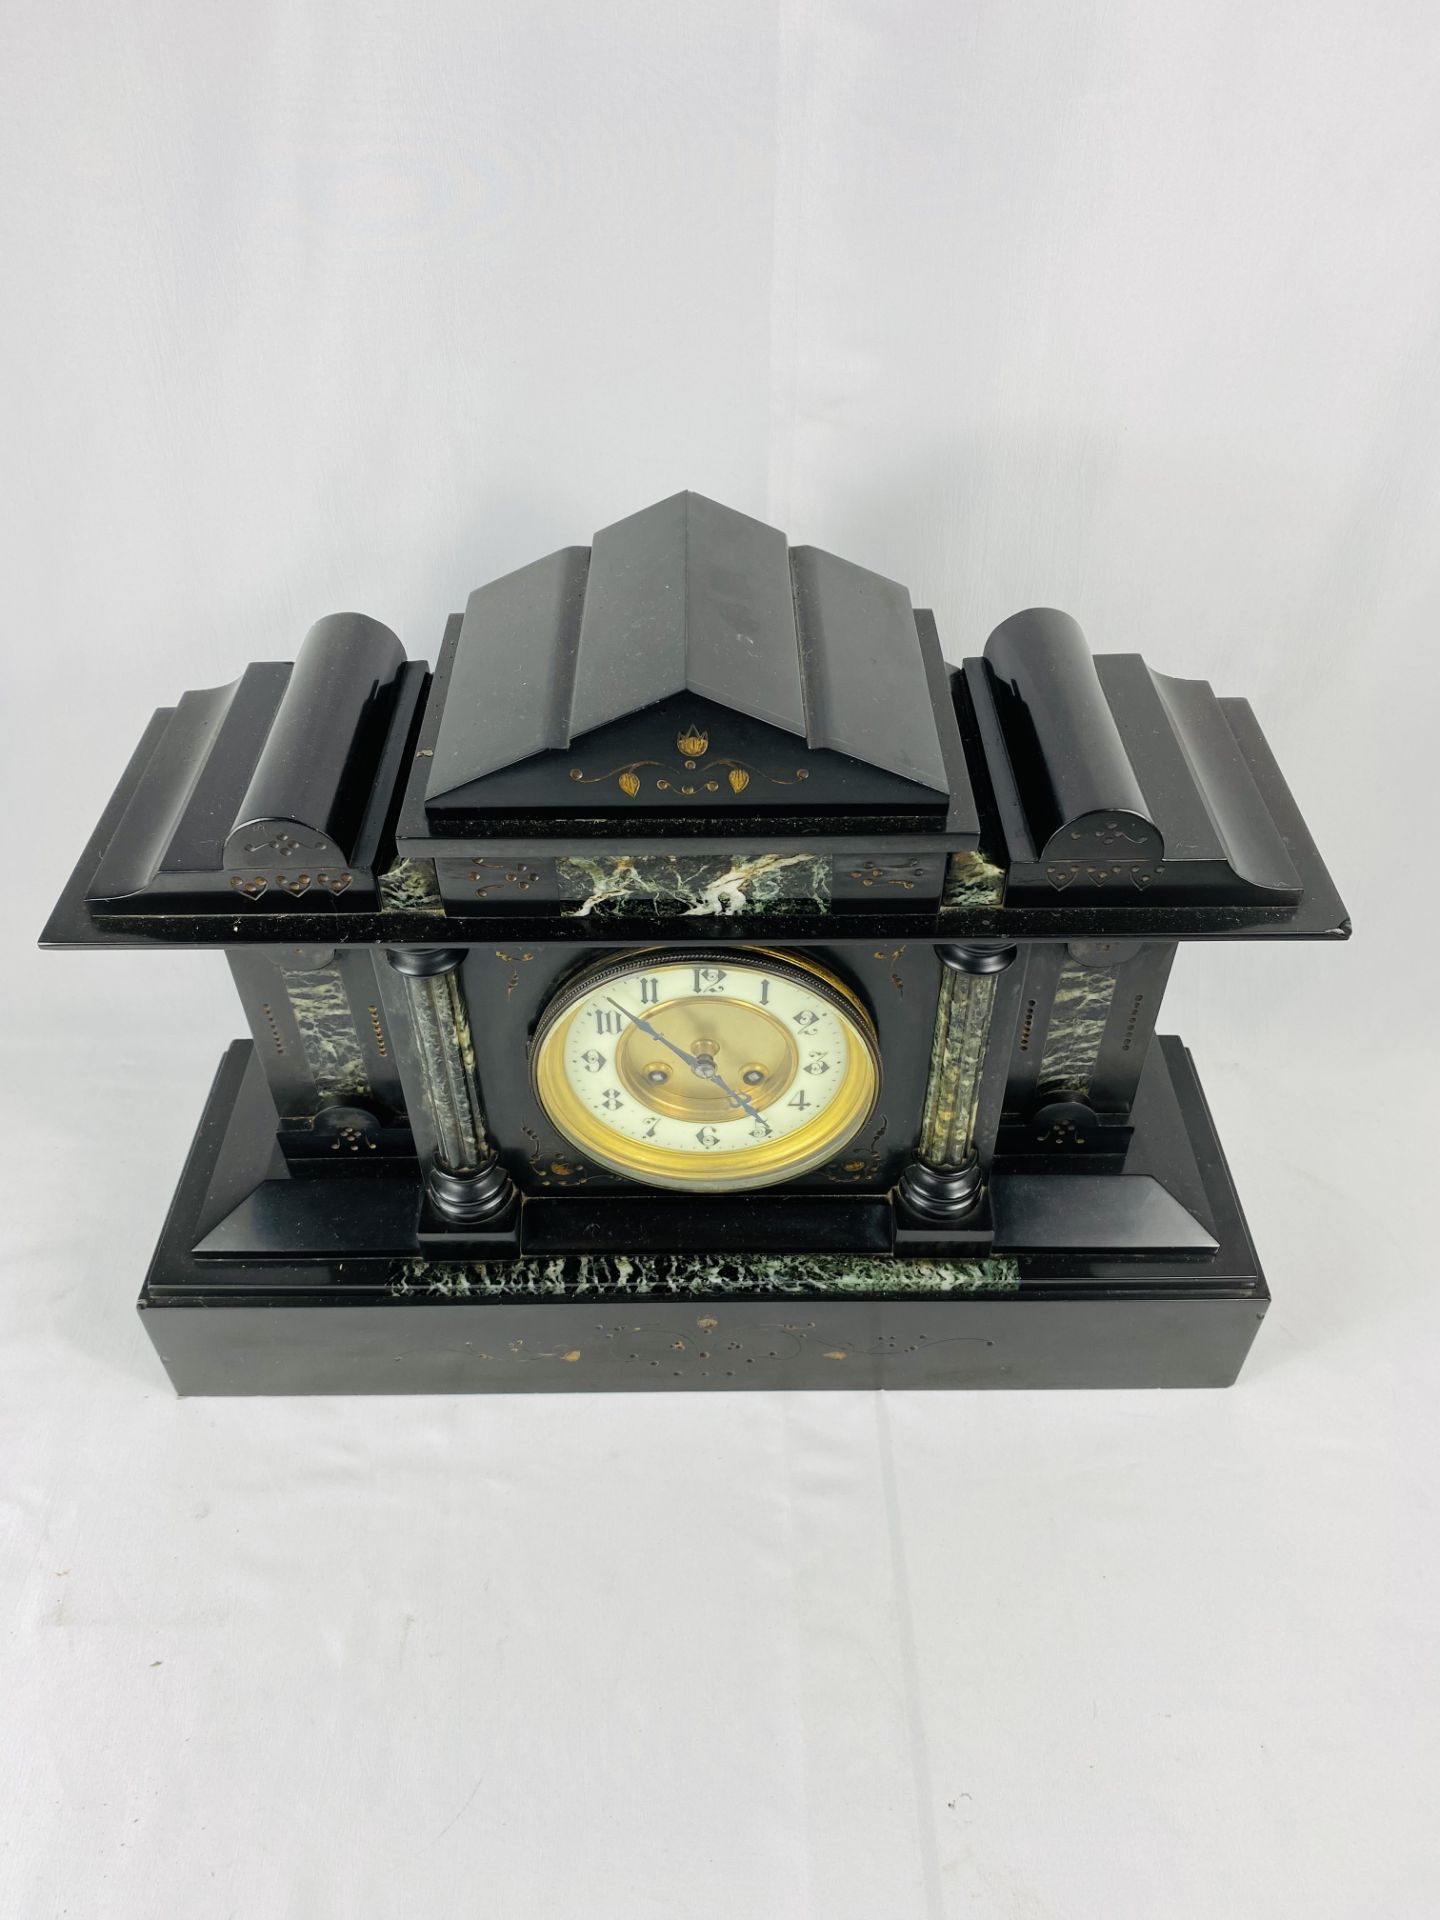 Slate cased mantel clock together with a mahogany mantel clock - Image 2 of 4